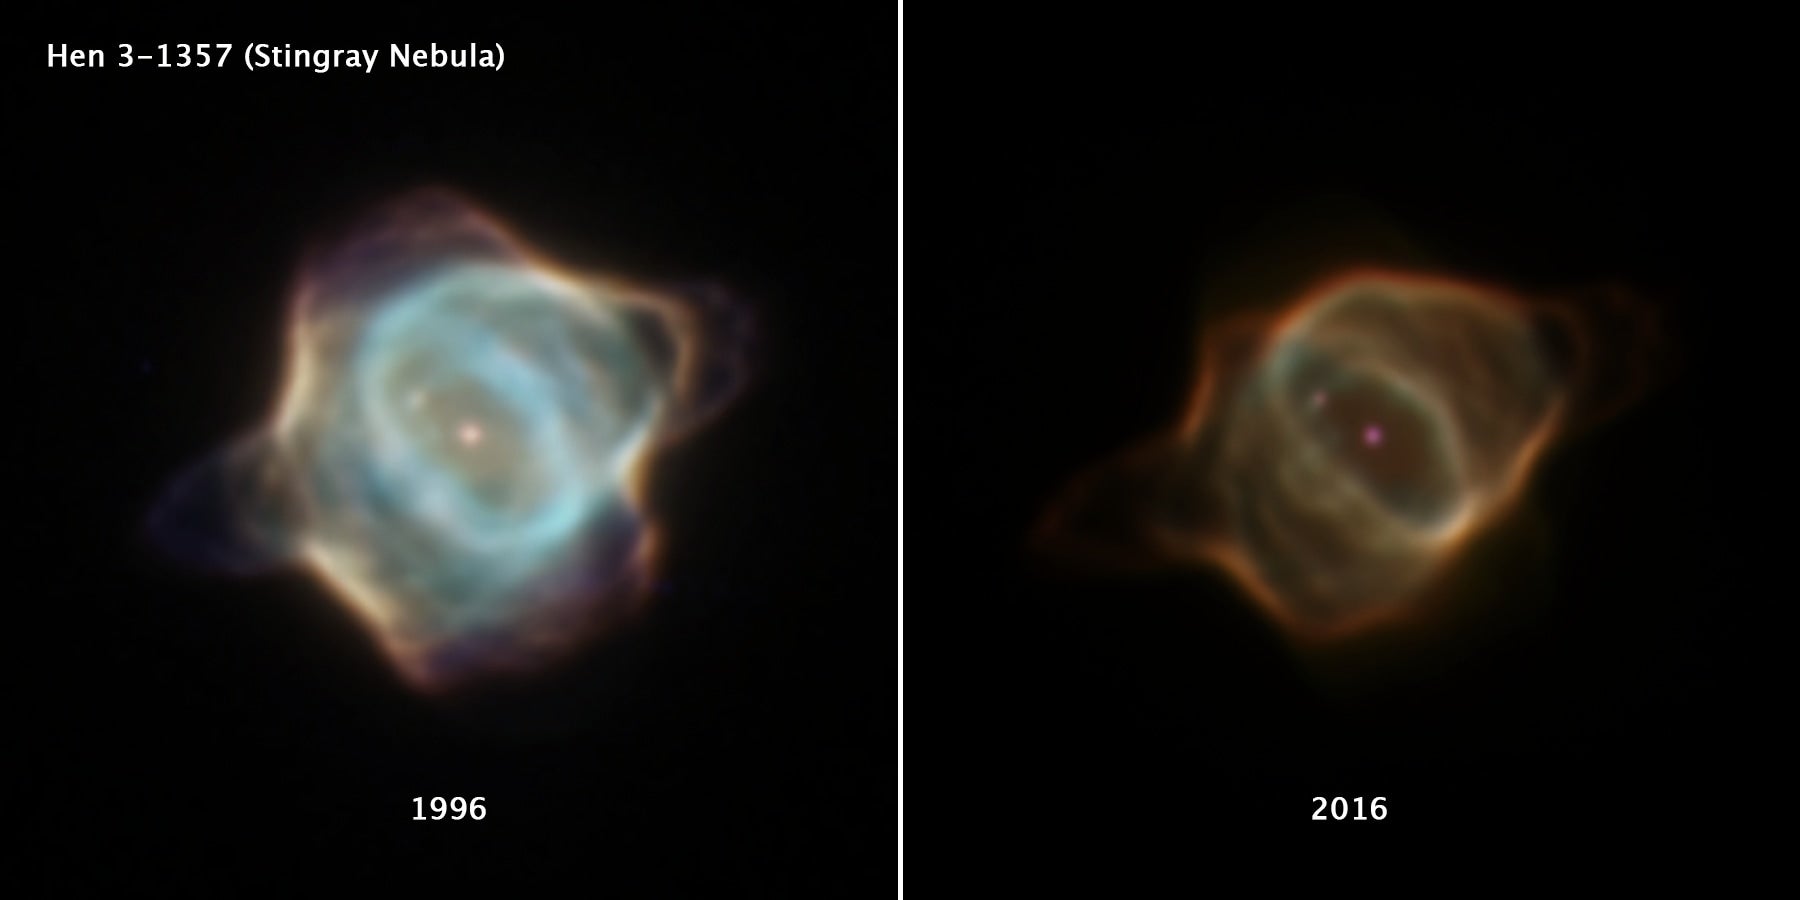 Two images of the Stingray Nebula, located in the direction of the southern constellation Ara -- or the Altar -- captured 20 years apart by NASA's Hubble Space Telescope. The image on the left was taken in March 1996, while the image on the right was captured in January 2016